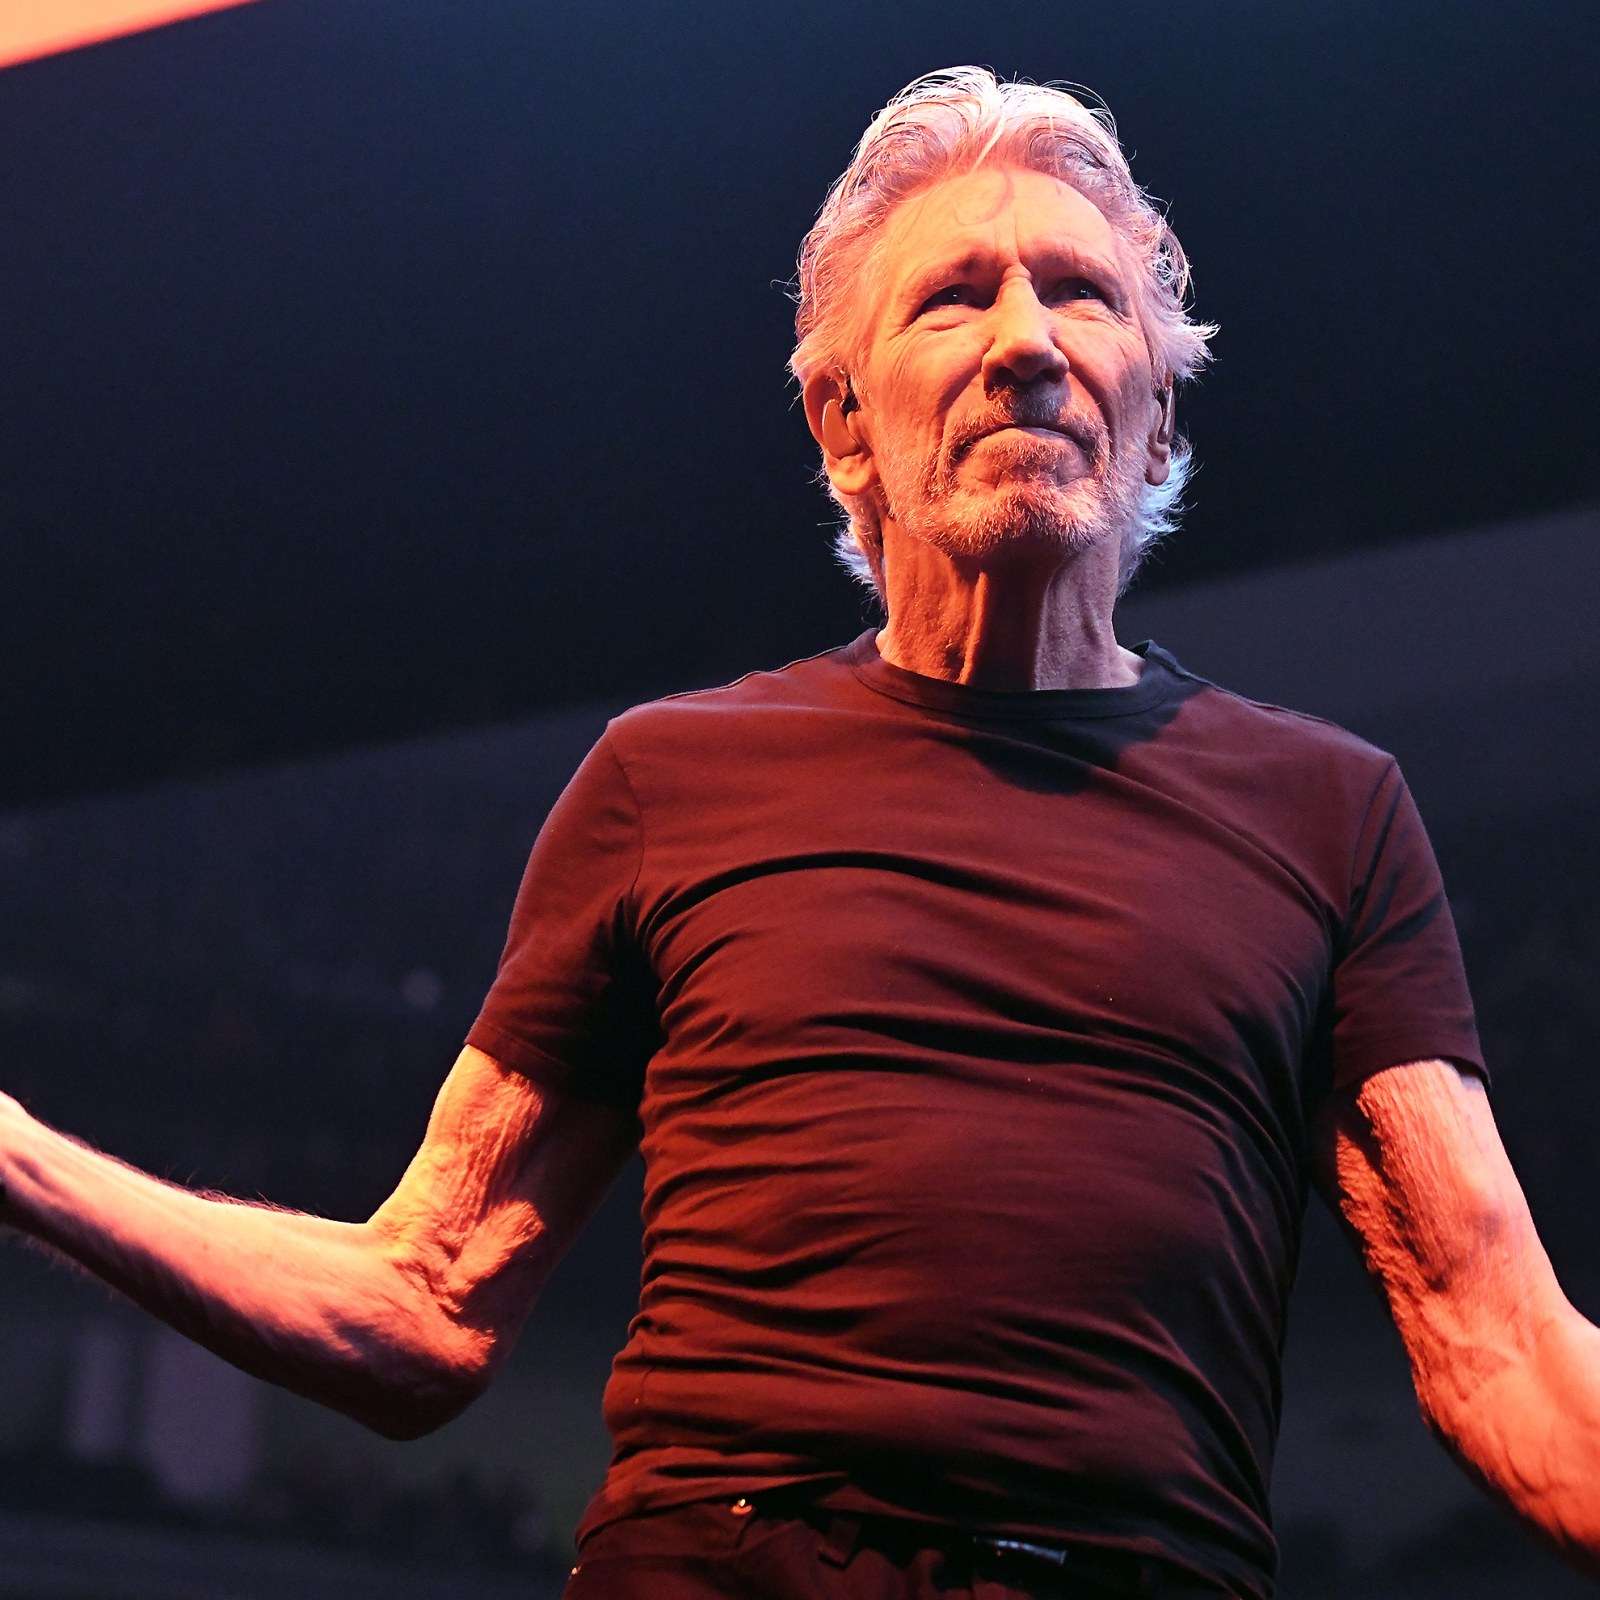 Roger Waters show gets cancelled